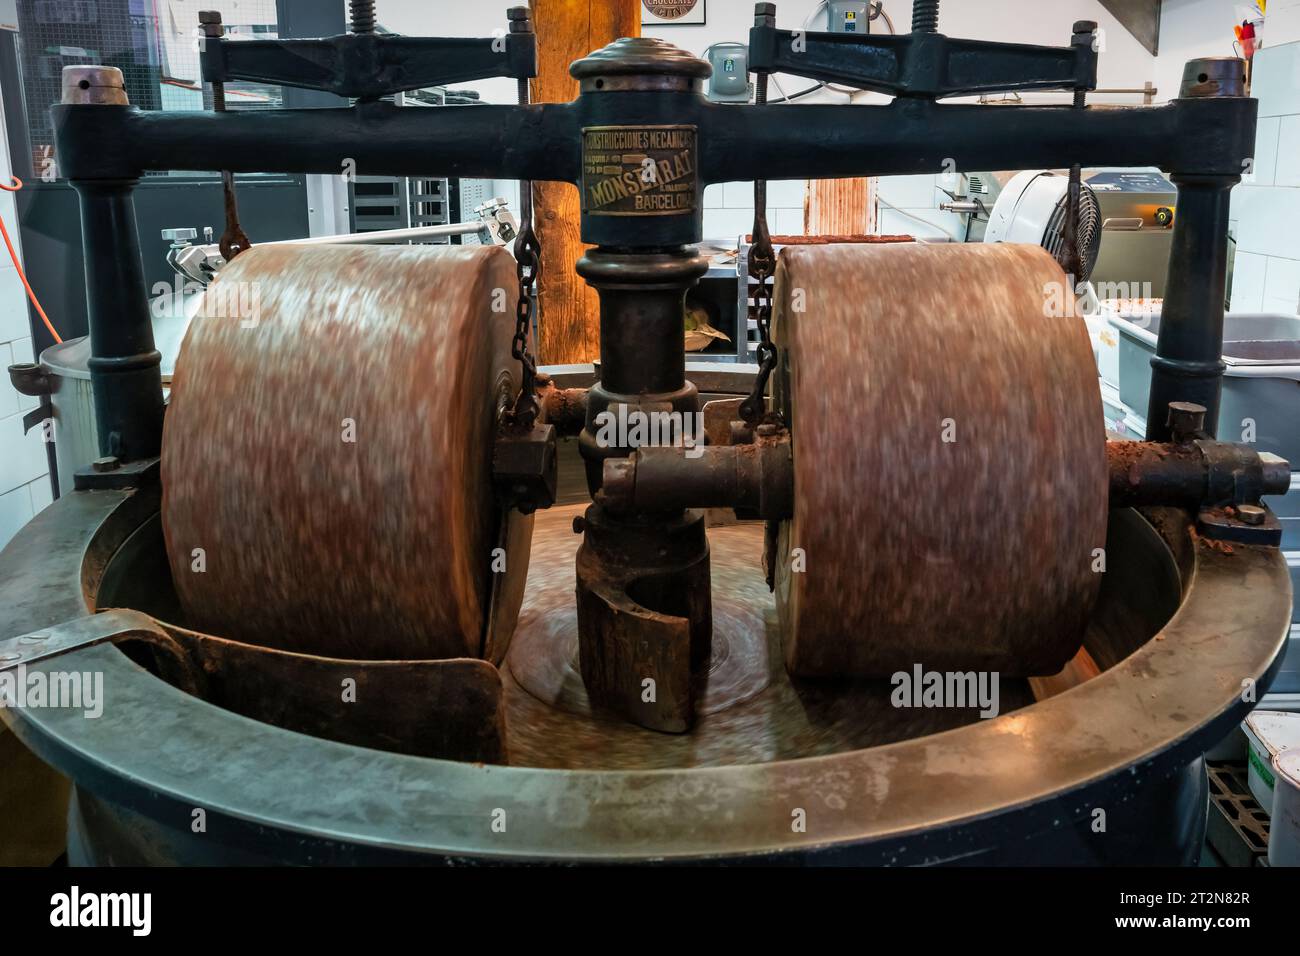 Old fashioned cocoa bean grinder at a chocolate shop in the Distillery District, Toronto, Ontario, Canada. Stock Photo